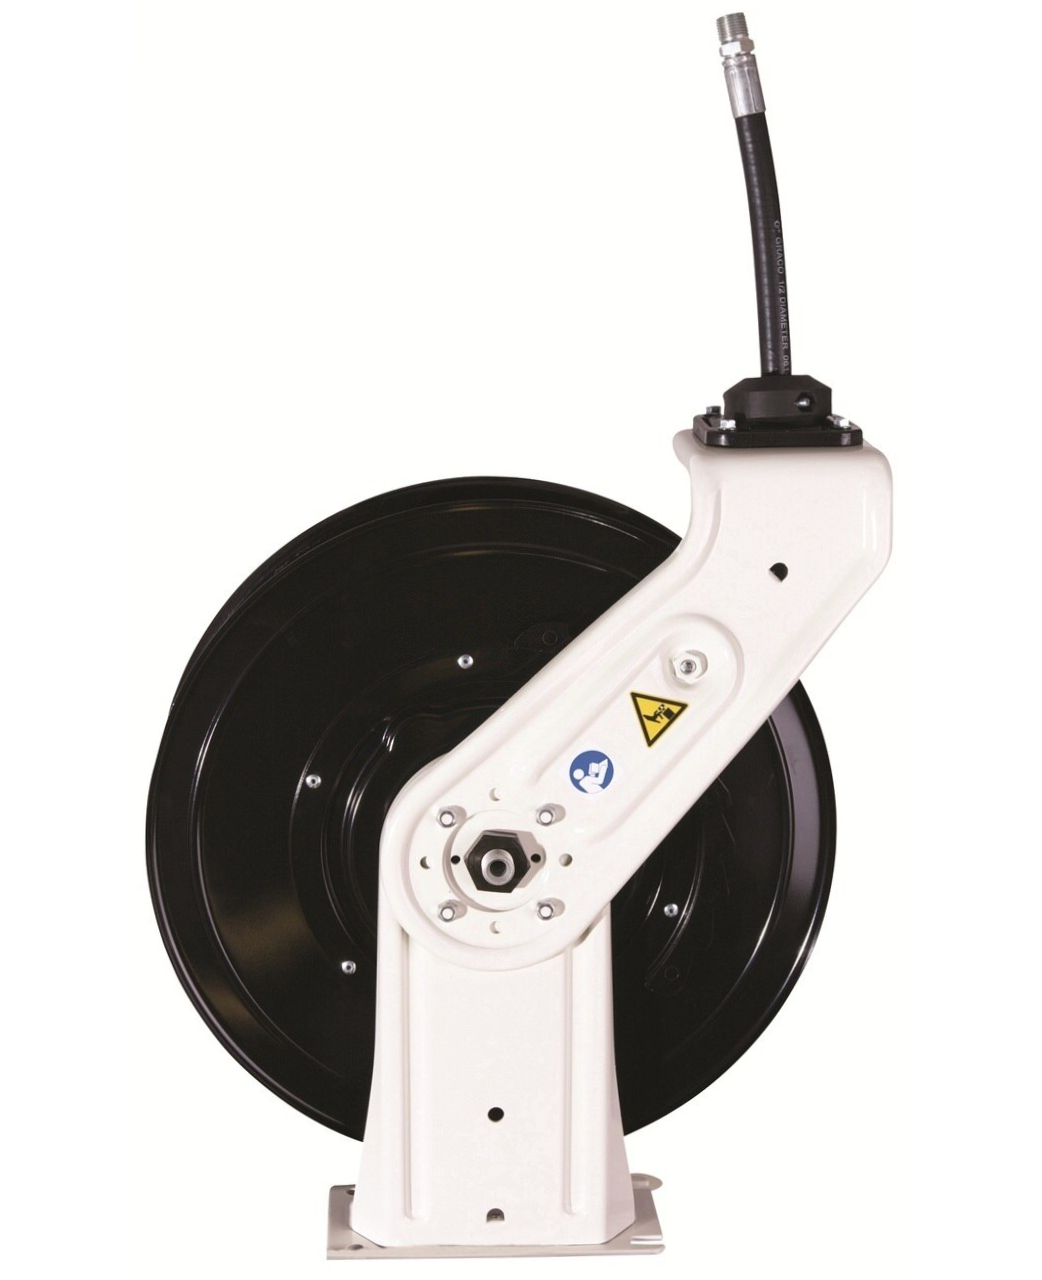 Graco SD10 Series Hose Reel w/ 1/2 in. X 35 ft. Hose - Air/Water - White (Overhead Mount)